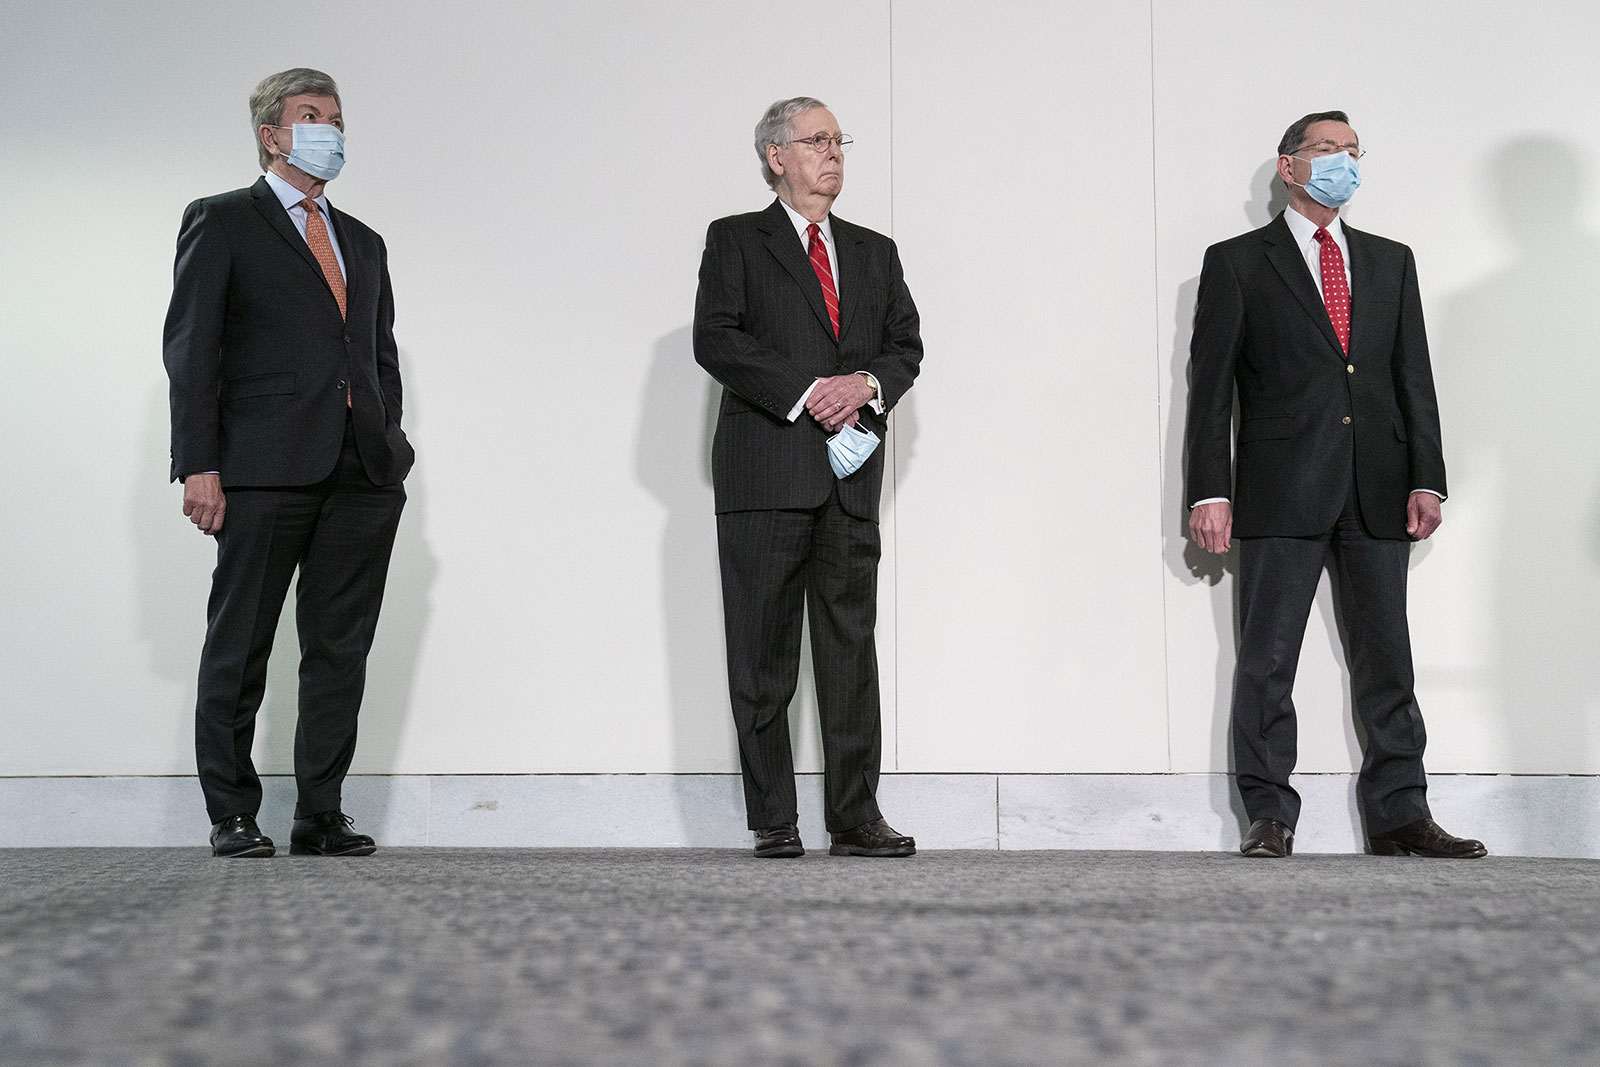 From left Sen. Roy Blunt, Sen. Mitch McConnell and Sen. John Barrasso look on during a news conference following the weekly Senate Republican caucus luncheon on Tuesday, May 5.